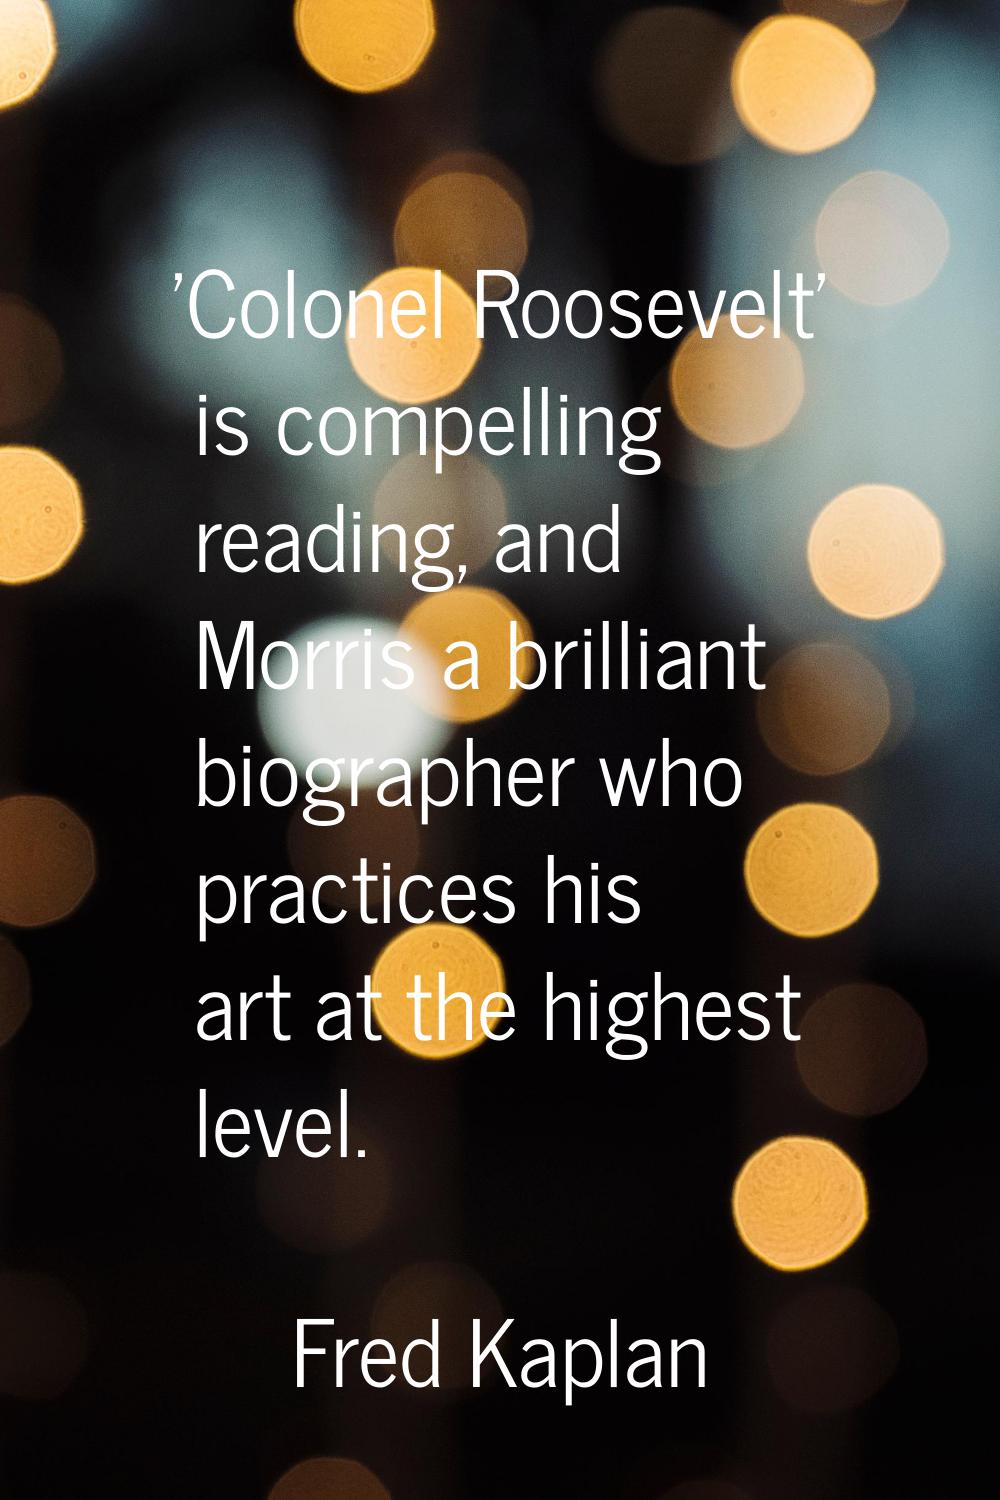 'Colonel Roosevelt' is compelling reading, and Morris a brilliant biographer who practices his art 